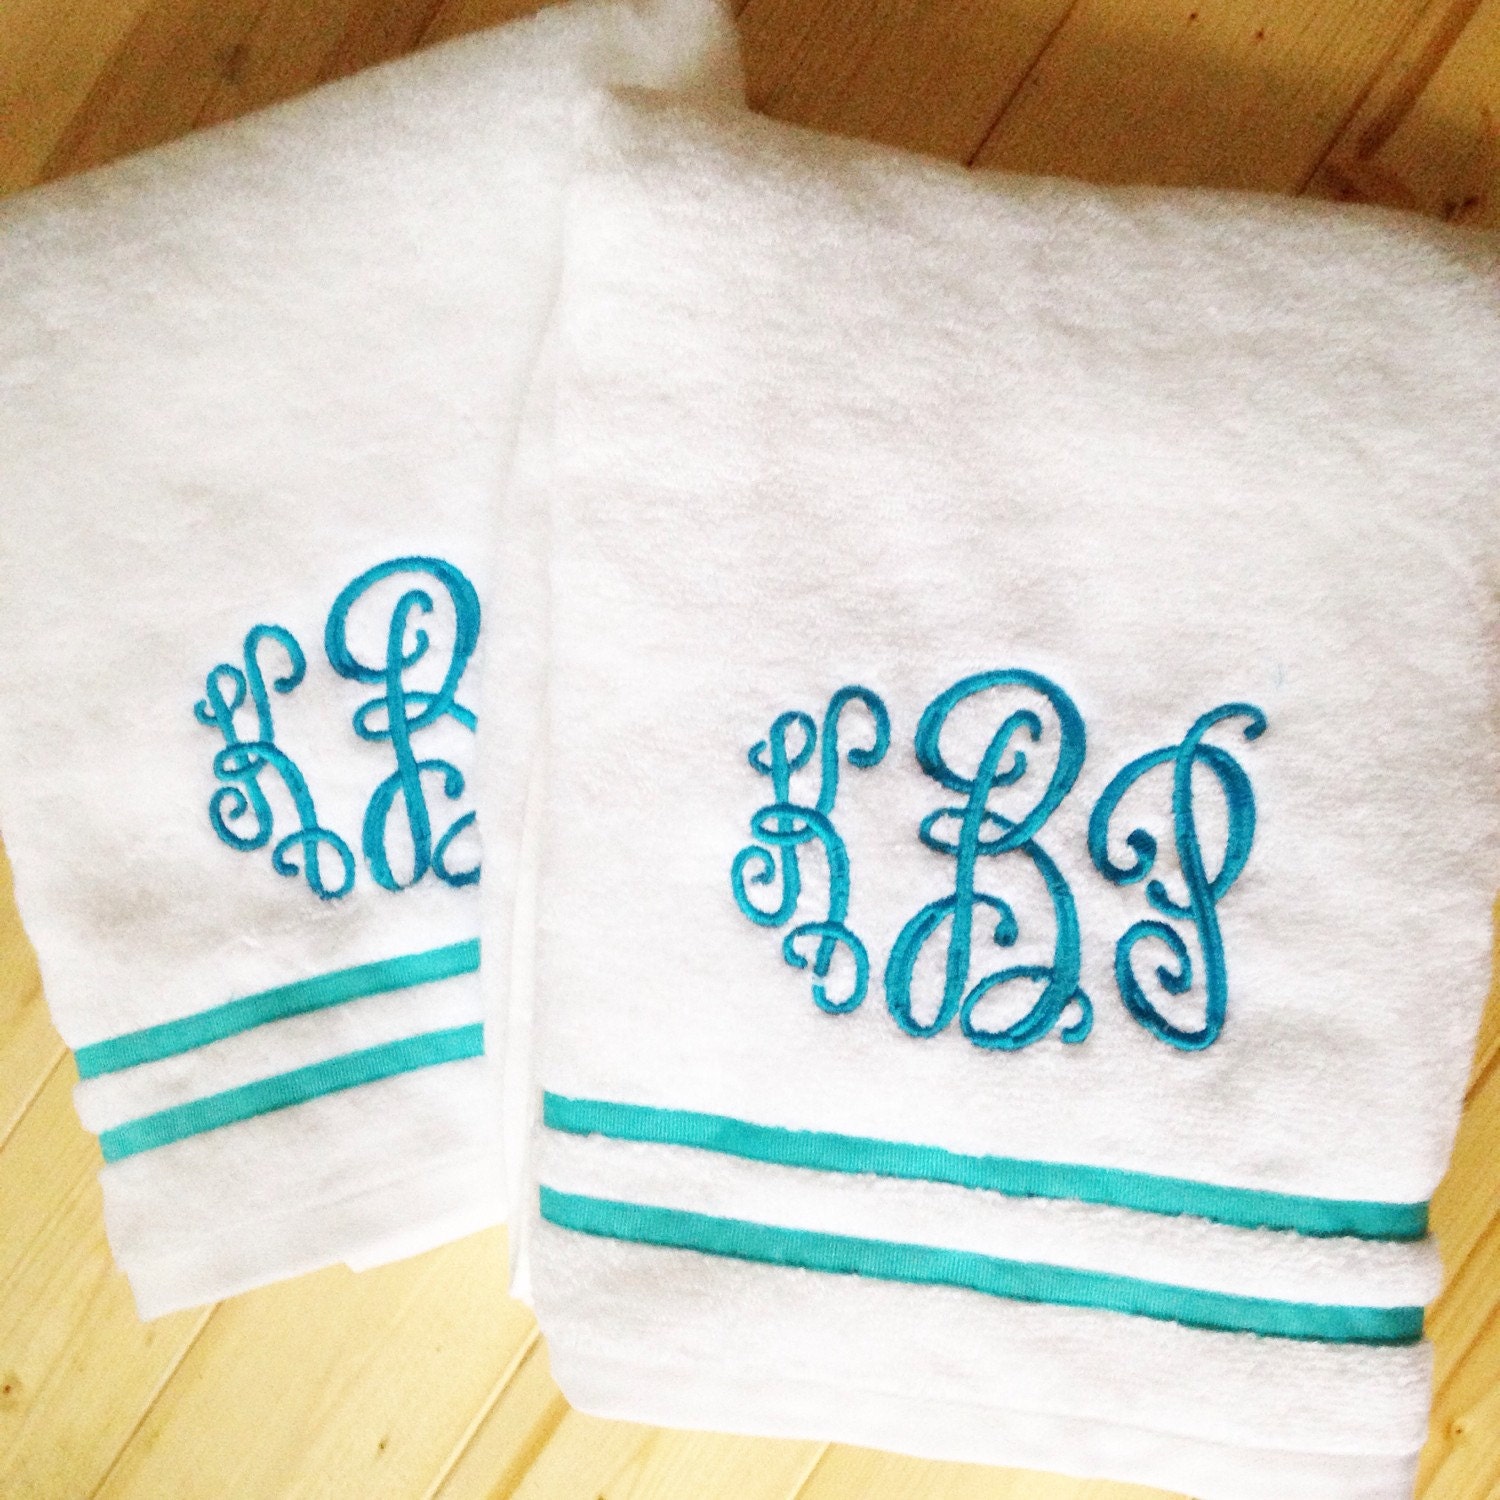 Personalized Lyra Towel Set with Monogrammed Initials, Bath Towel Set